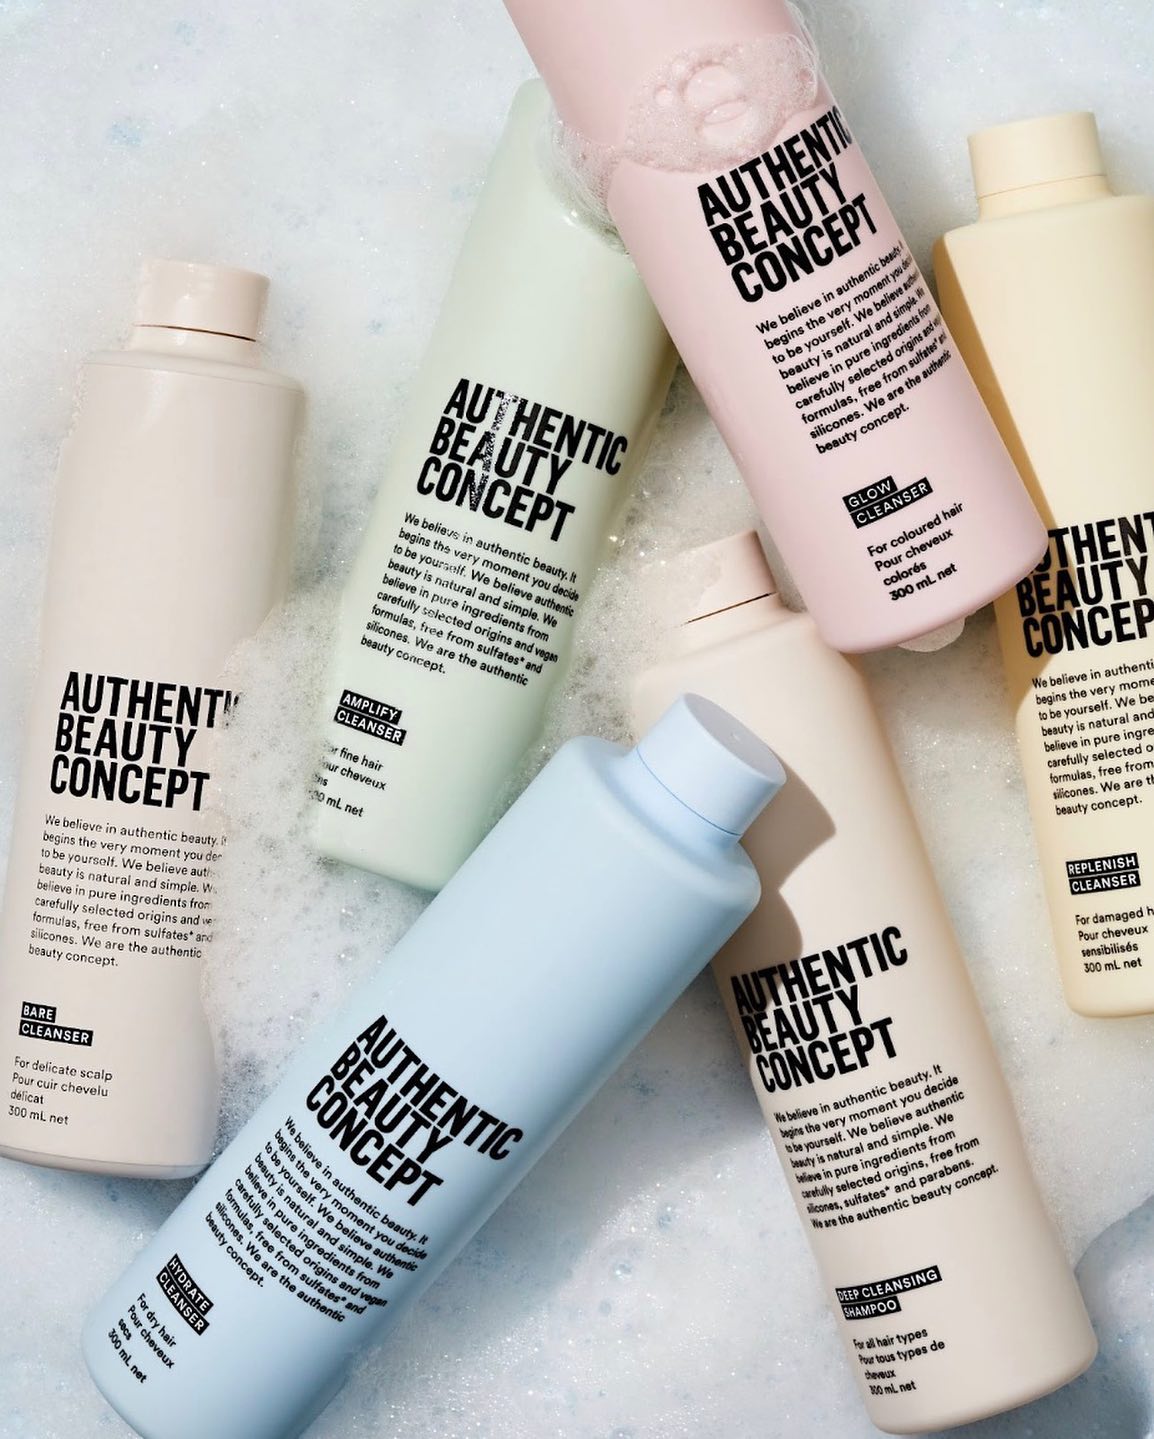 Authentic Beauty Concept Products in Soapy Water - Featuring One Product from Each Collection: Hydrate, Amplify, Replenish, and Indulge